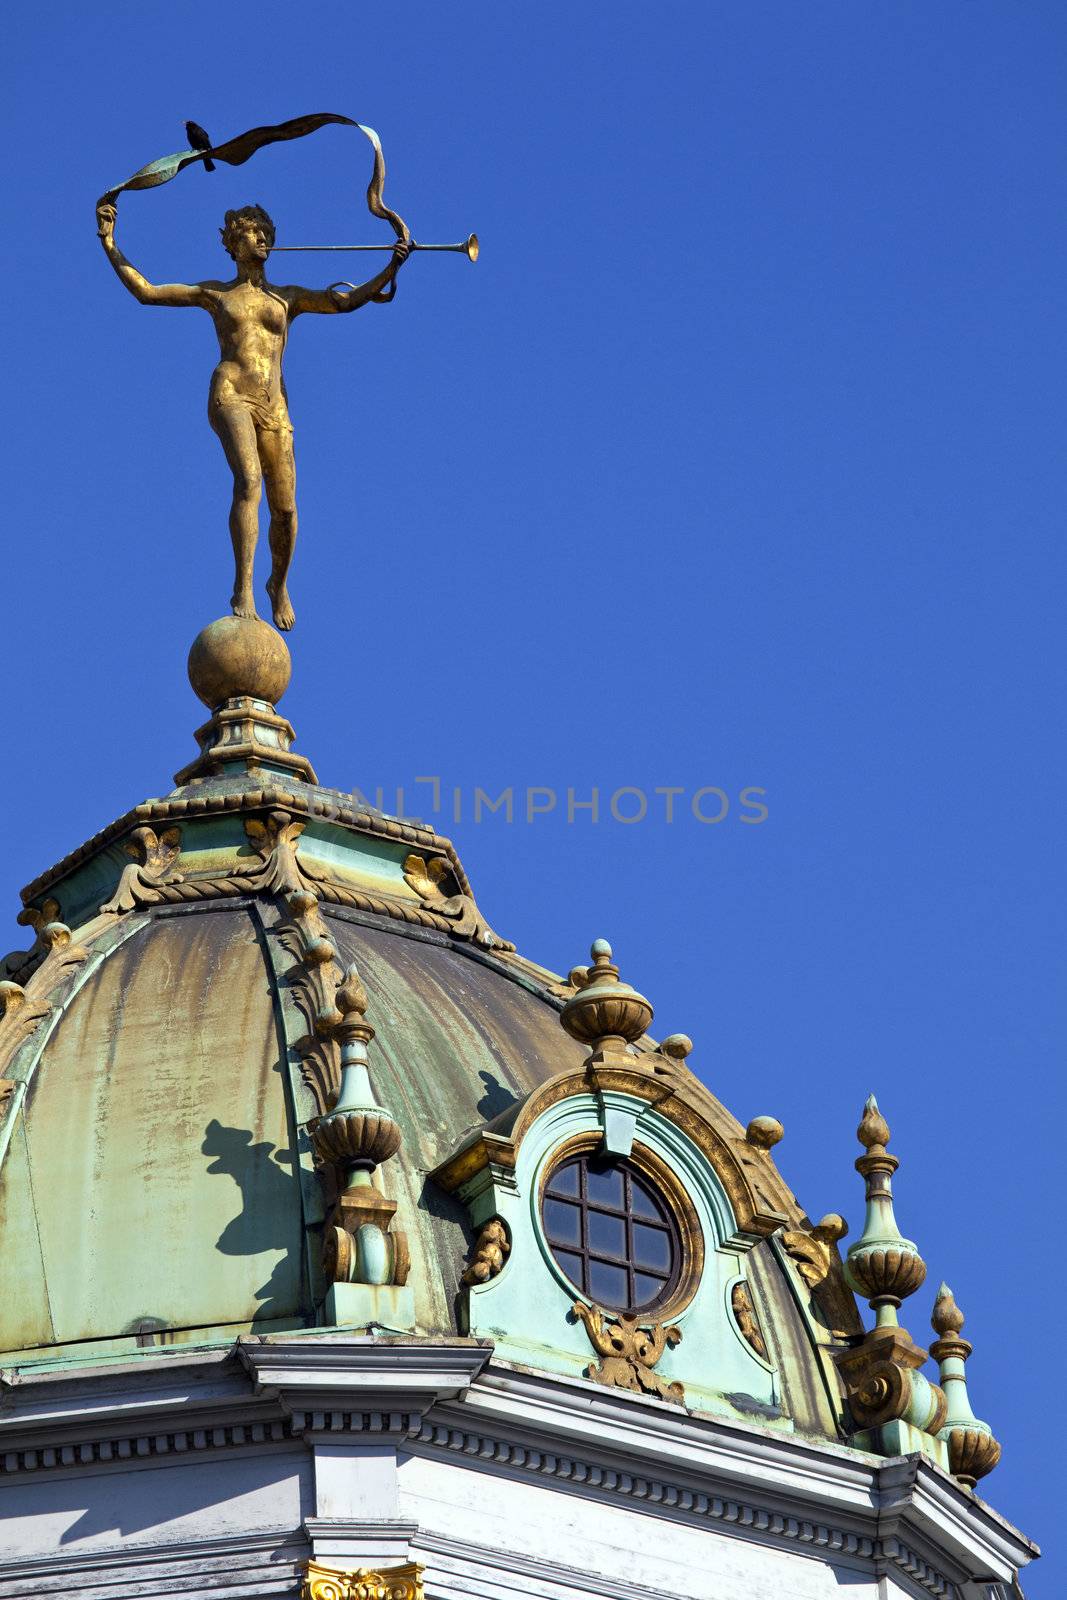 Sculpture on Guildhall in Grand Place, Brussels by chrisdorney